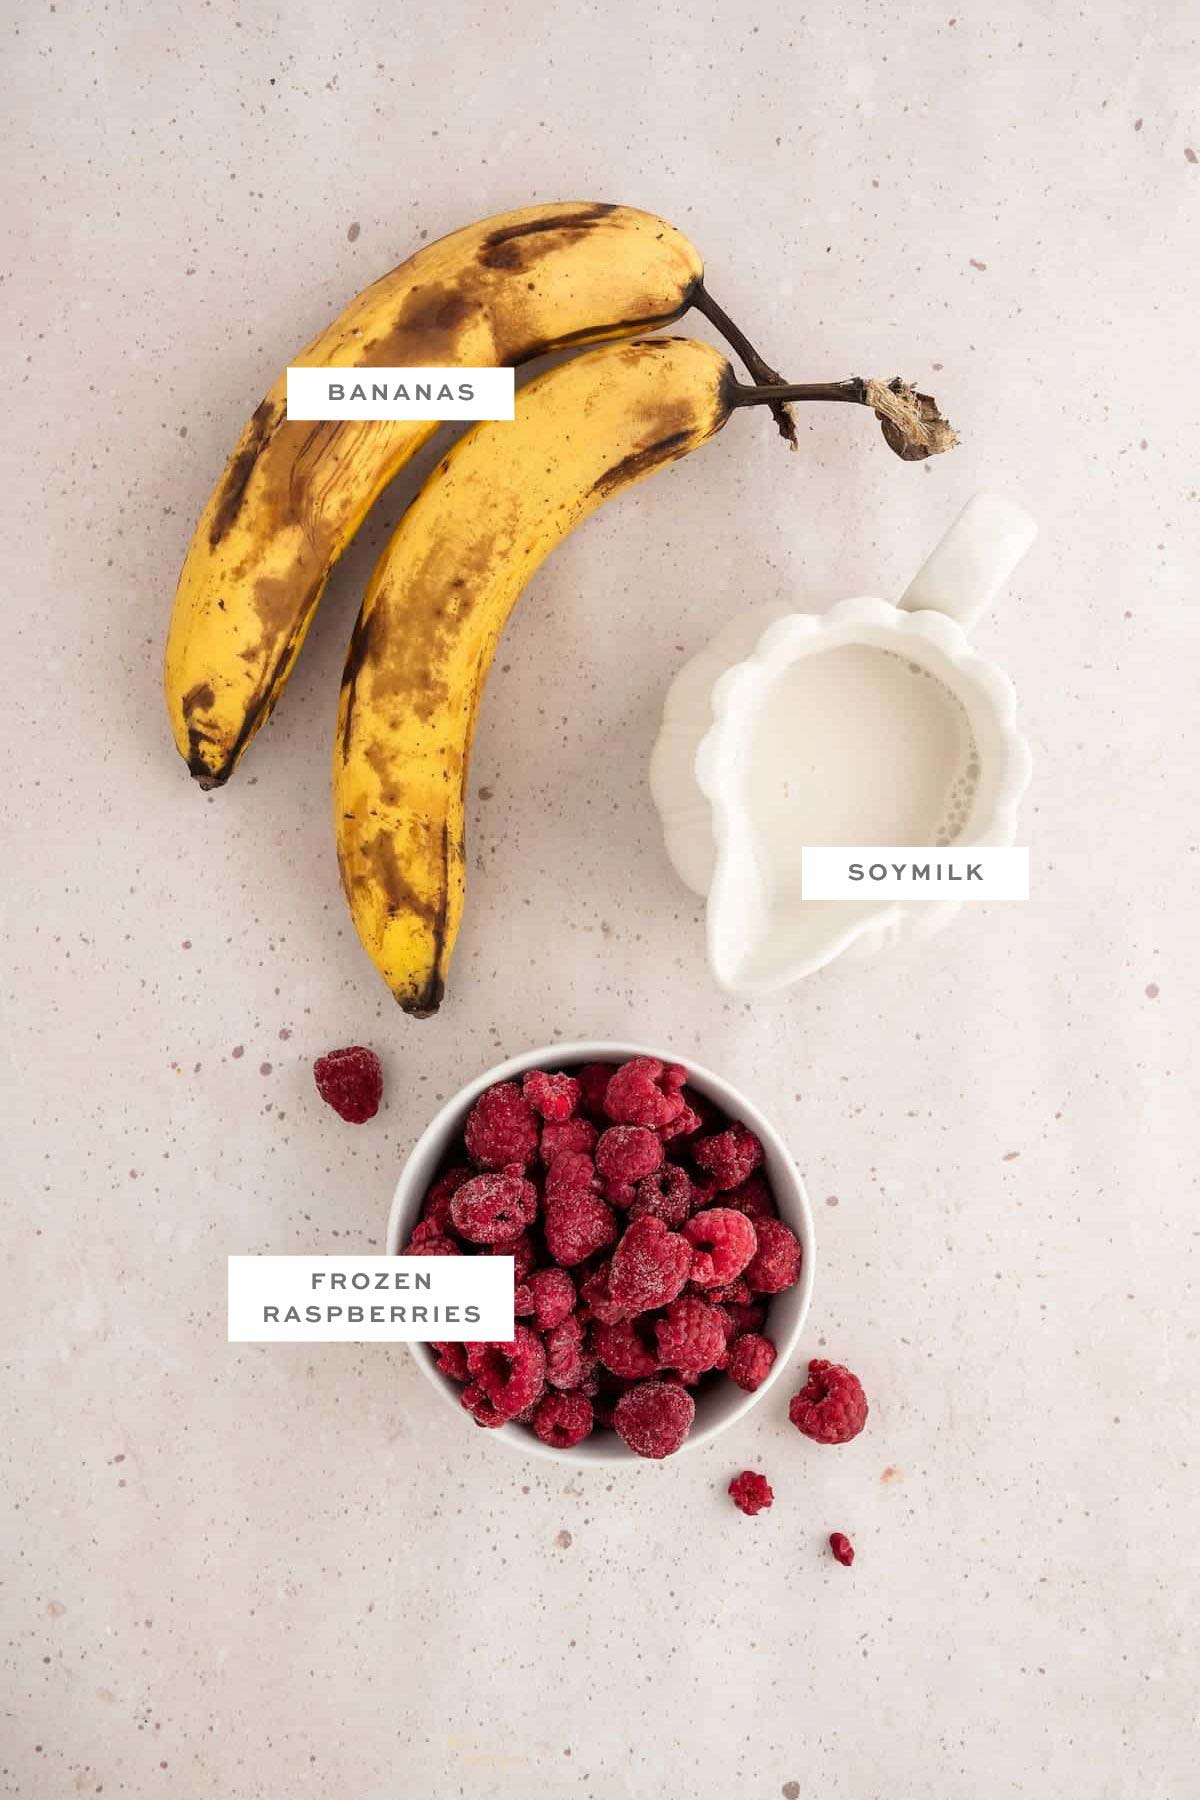 Ingredients for a raspberry smoothie with labels.